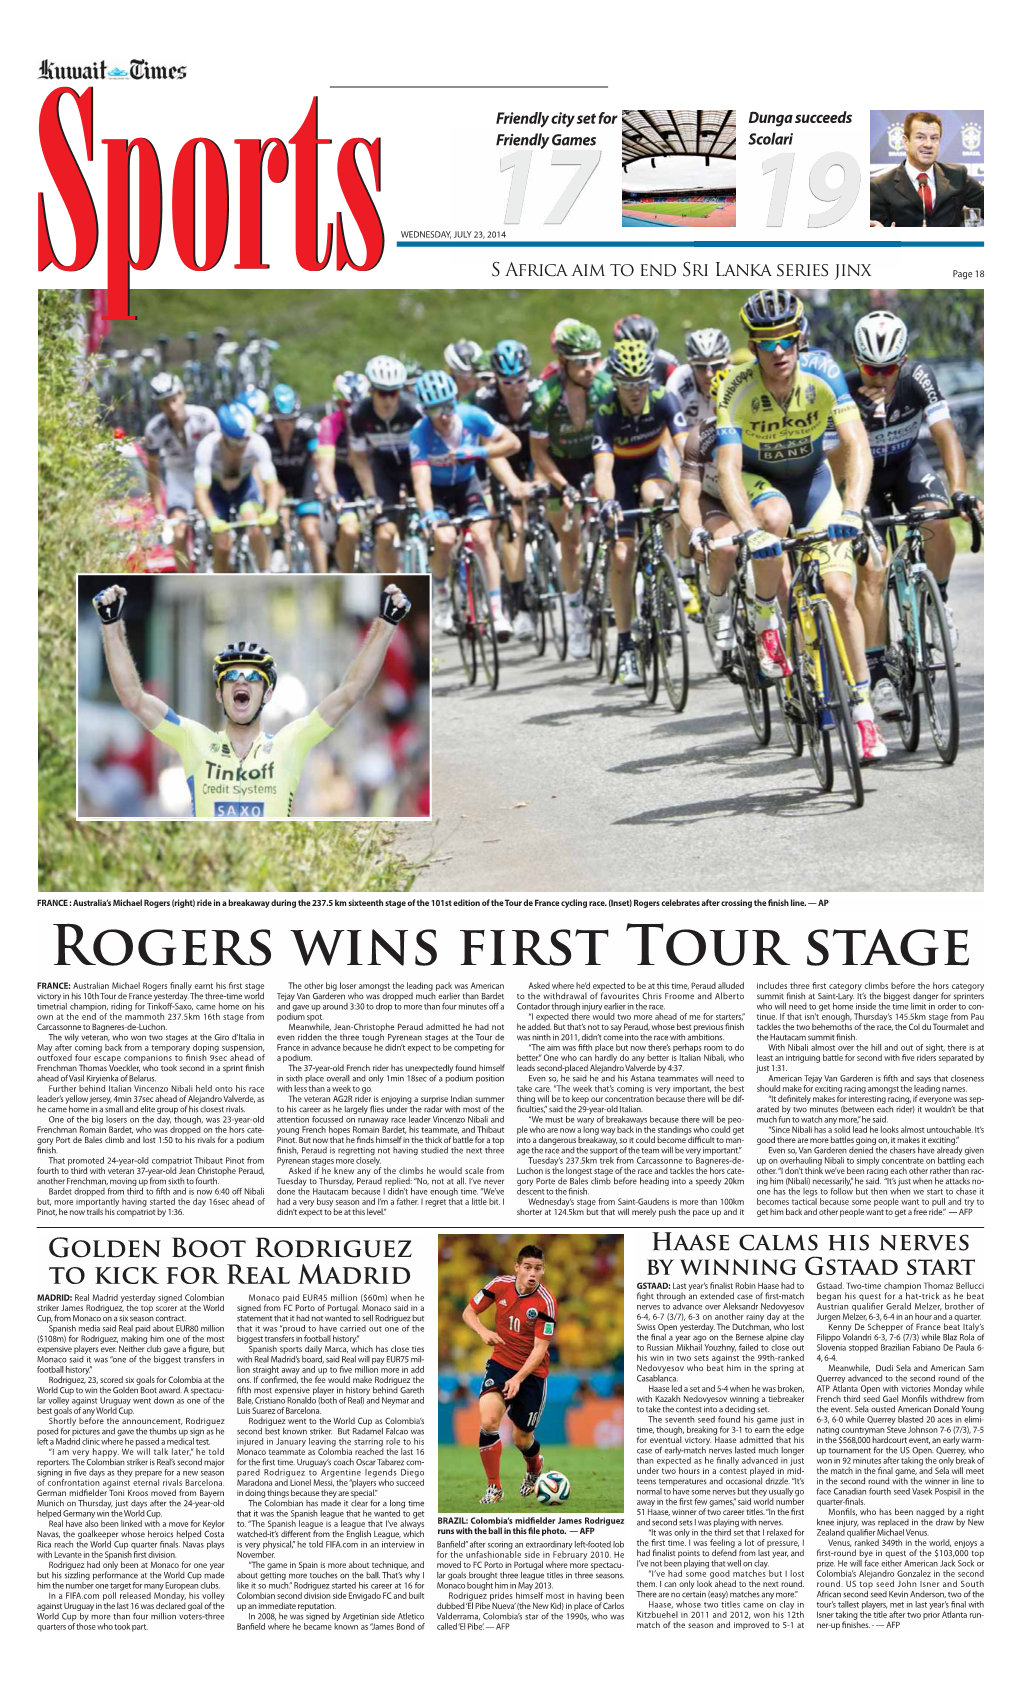 Rogers Wins First Tour Stage